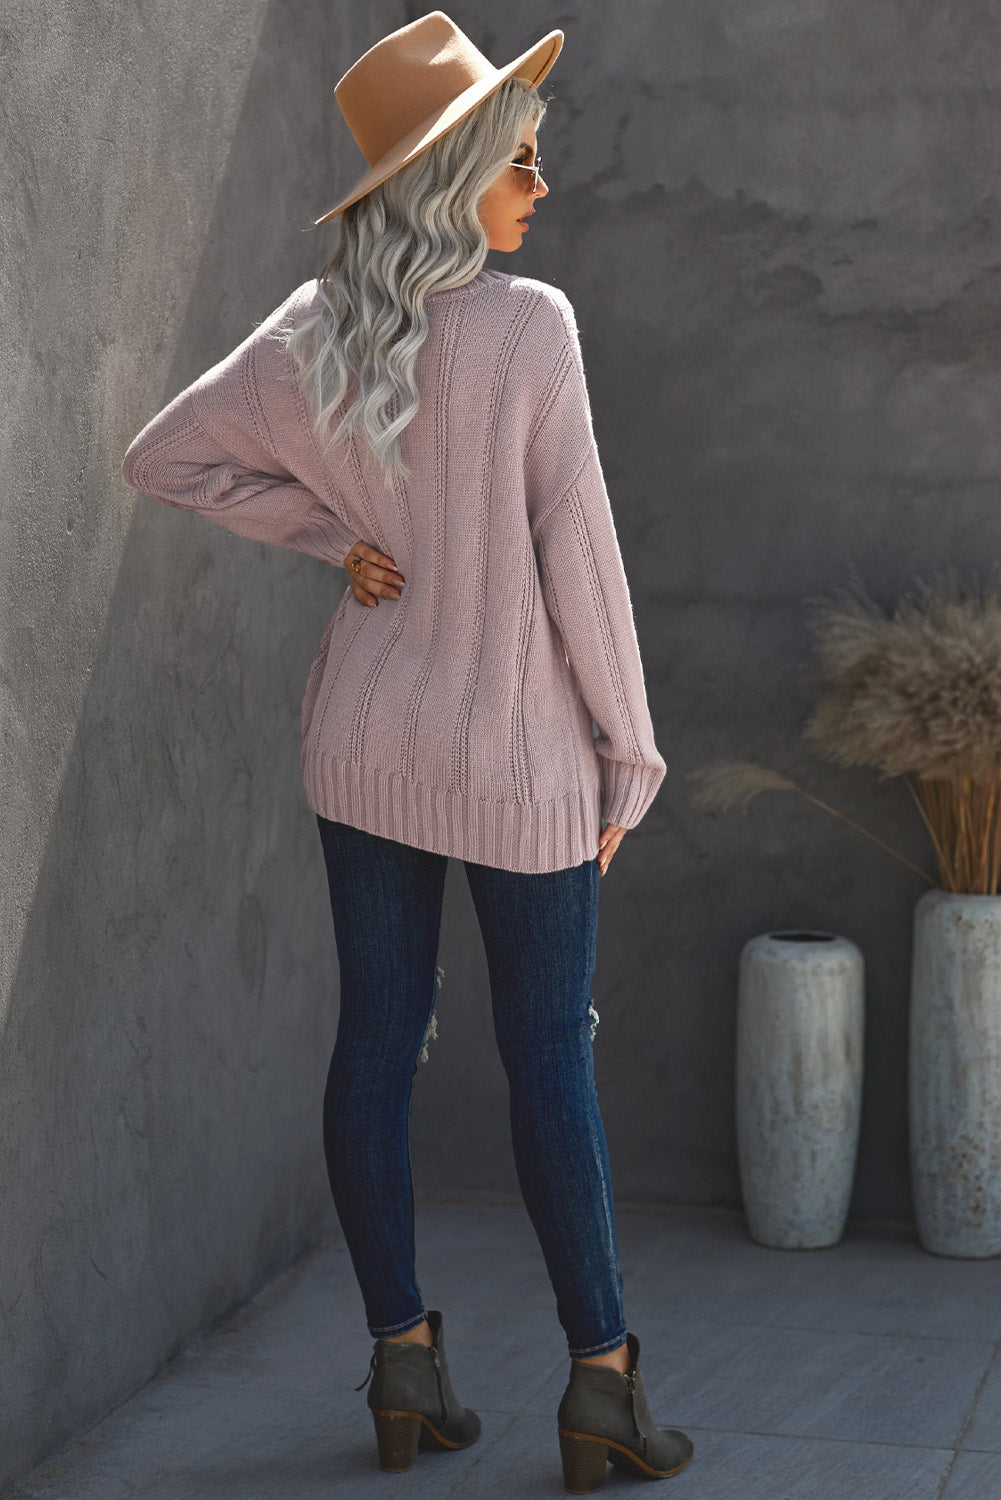 Winter Pink Oversize Thick Pullover Sweater